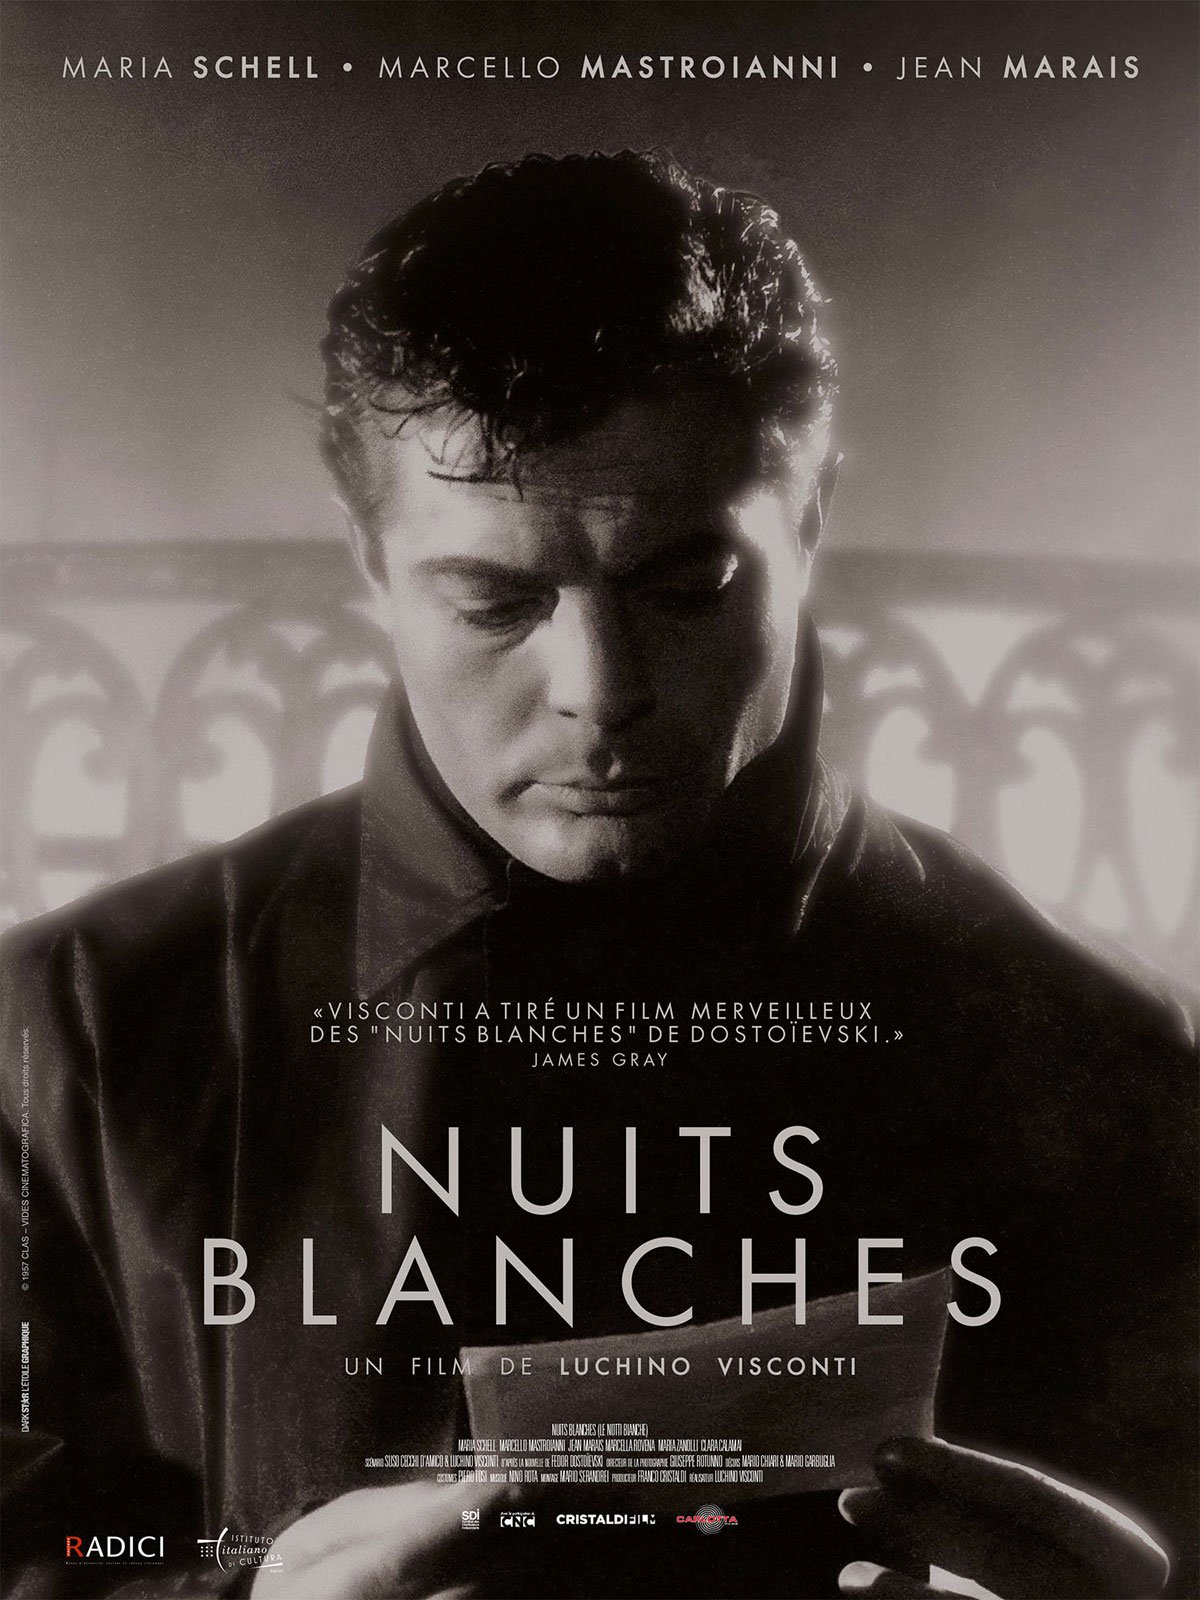 Nuits blanches en DVD : Nuits blanches - AlloCiné